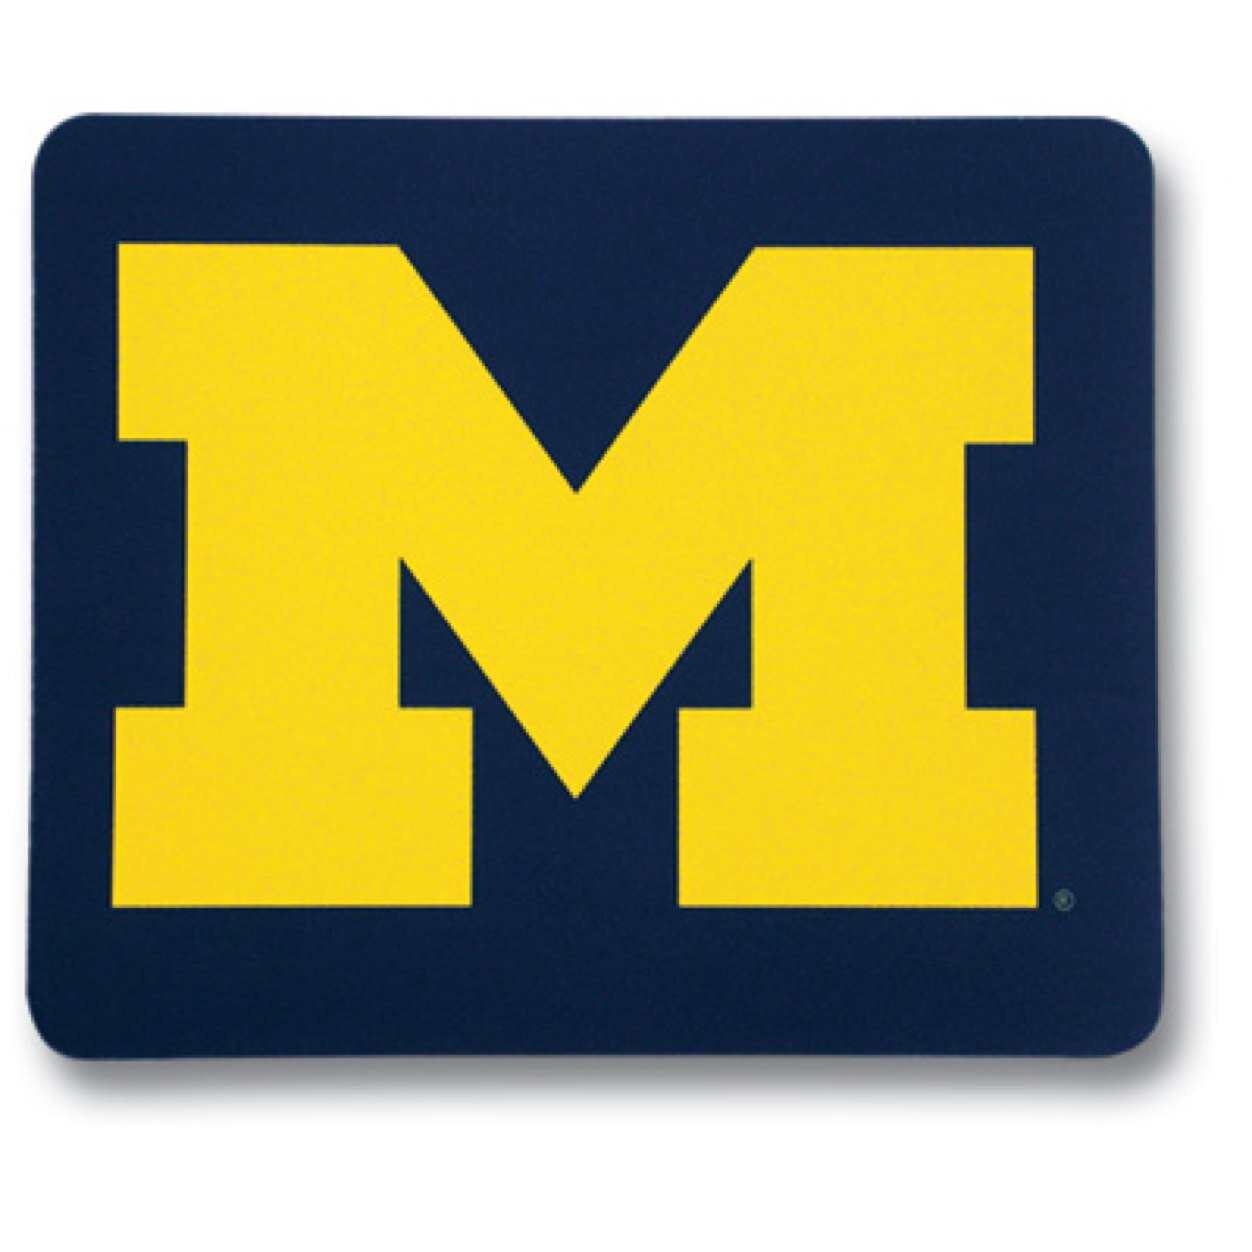 Trying to figure this twitter thing out....one thing I know for sure....#GoBlue